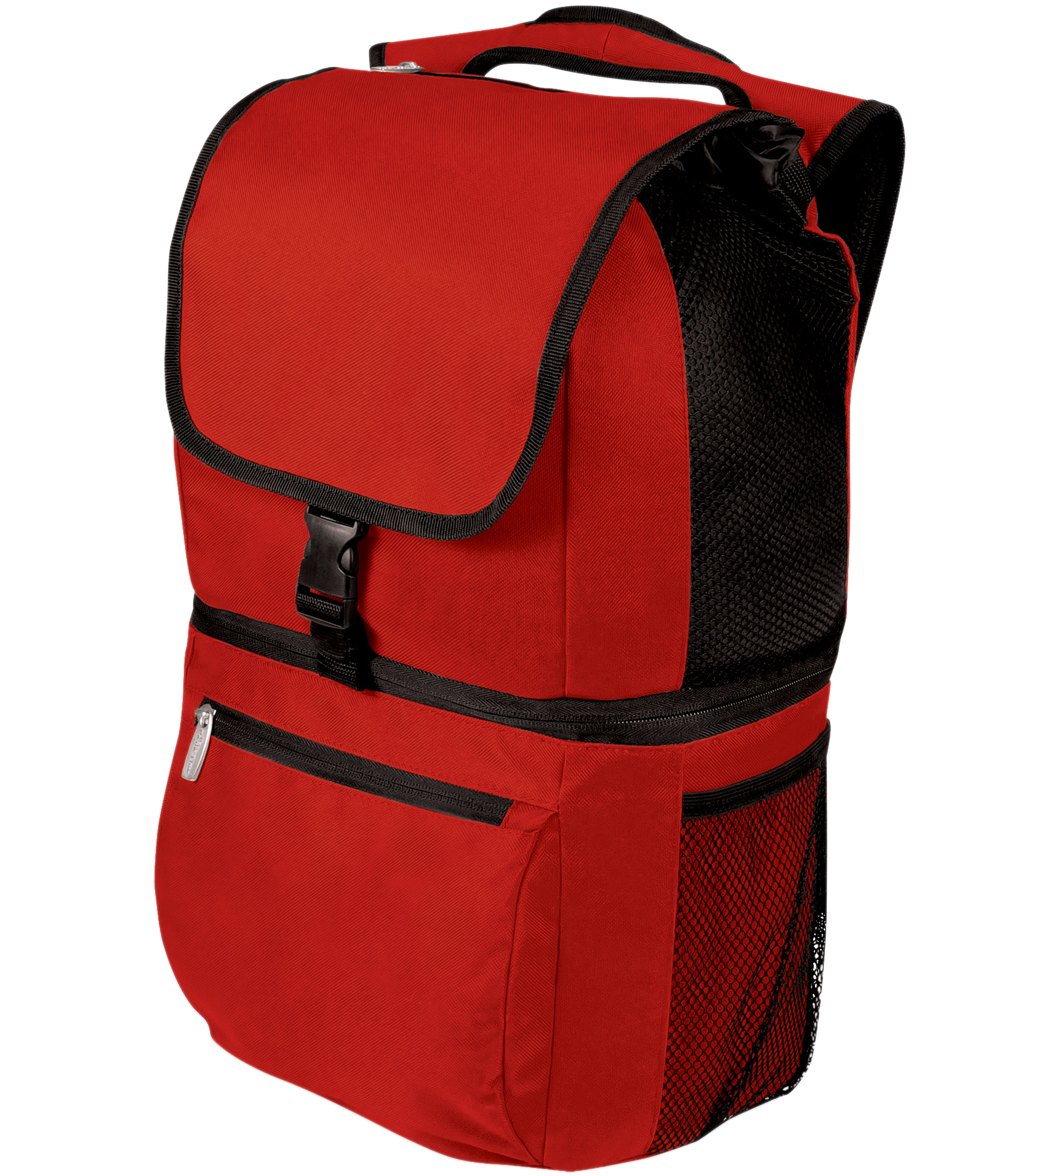 Picnic Time Zuma Backpack Cooler - Red - Swimoutlet.com